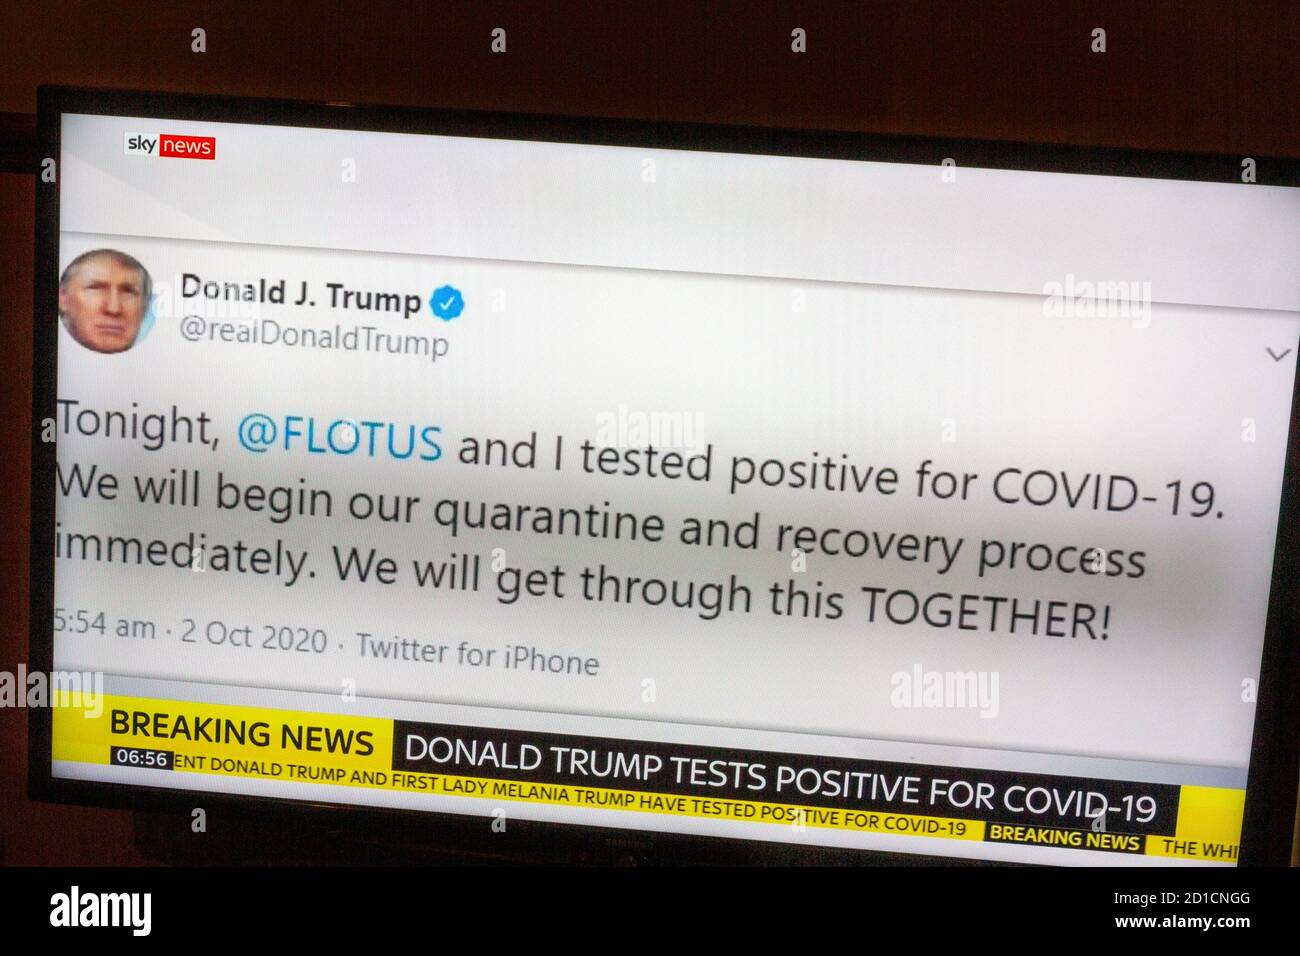 Photo of TV screen showing Sky News breaking news with tweet from US President Donald Trump that he had tested positive for Covid-19, 2nd Oct 2020. Stock Photo